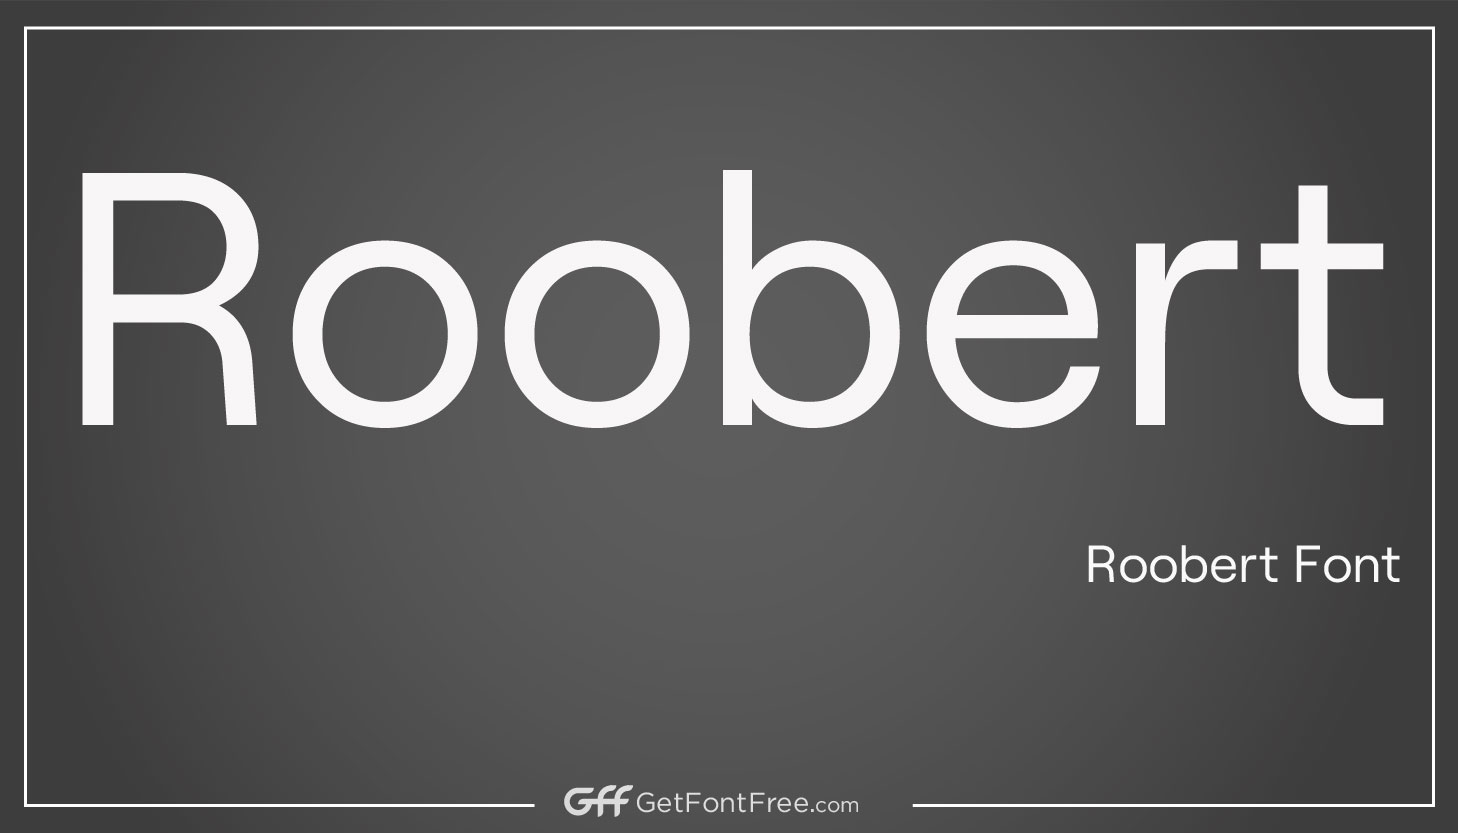 Roobert is a geometric sans-serif typeface designed by Radomir Tinkov. It was inspired by the aesthetics of the Bauhaus movement and has a clean, modern look with sharp edges and circular forms. Roobert is available in six weights ranging from Thin to Black, with matching italics for each weight. It is well-suited for use in a variety of contexts, including headlines, display type, and body text.